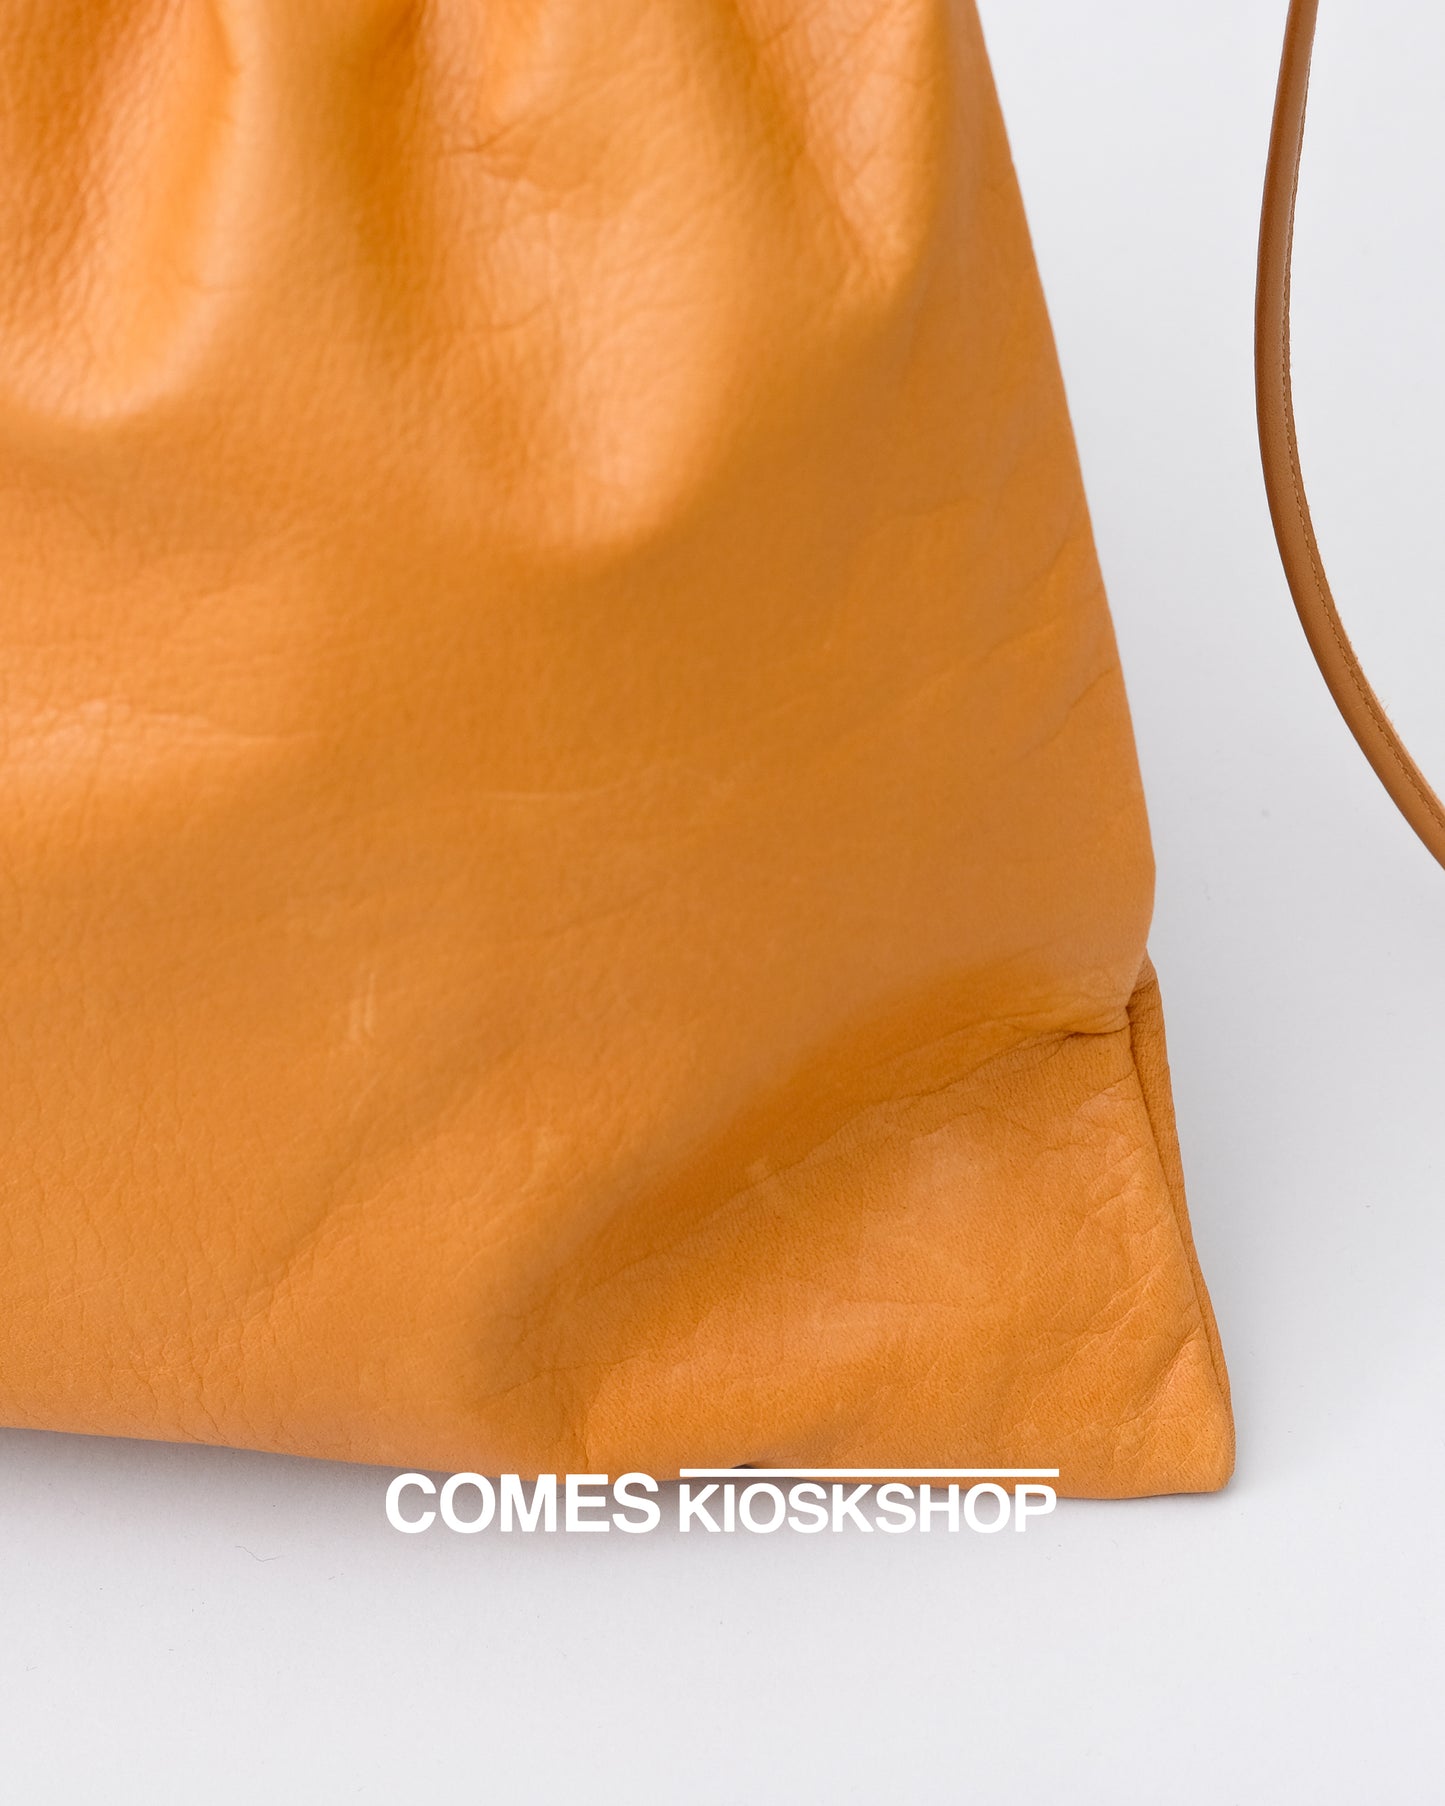 COW LEATHER DRAWSTRING BAG (SMALL)